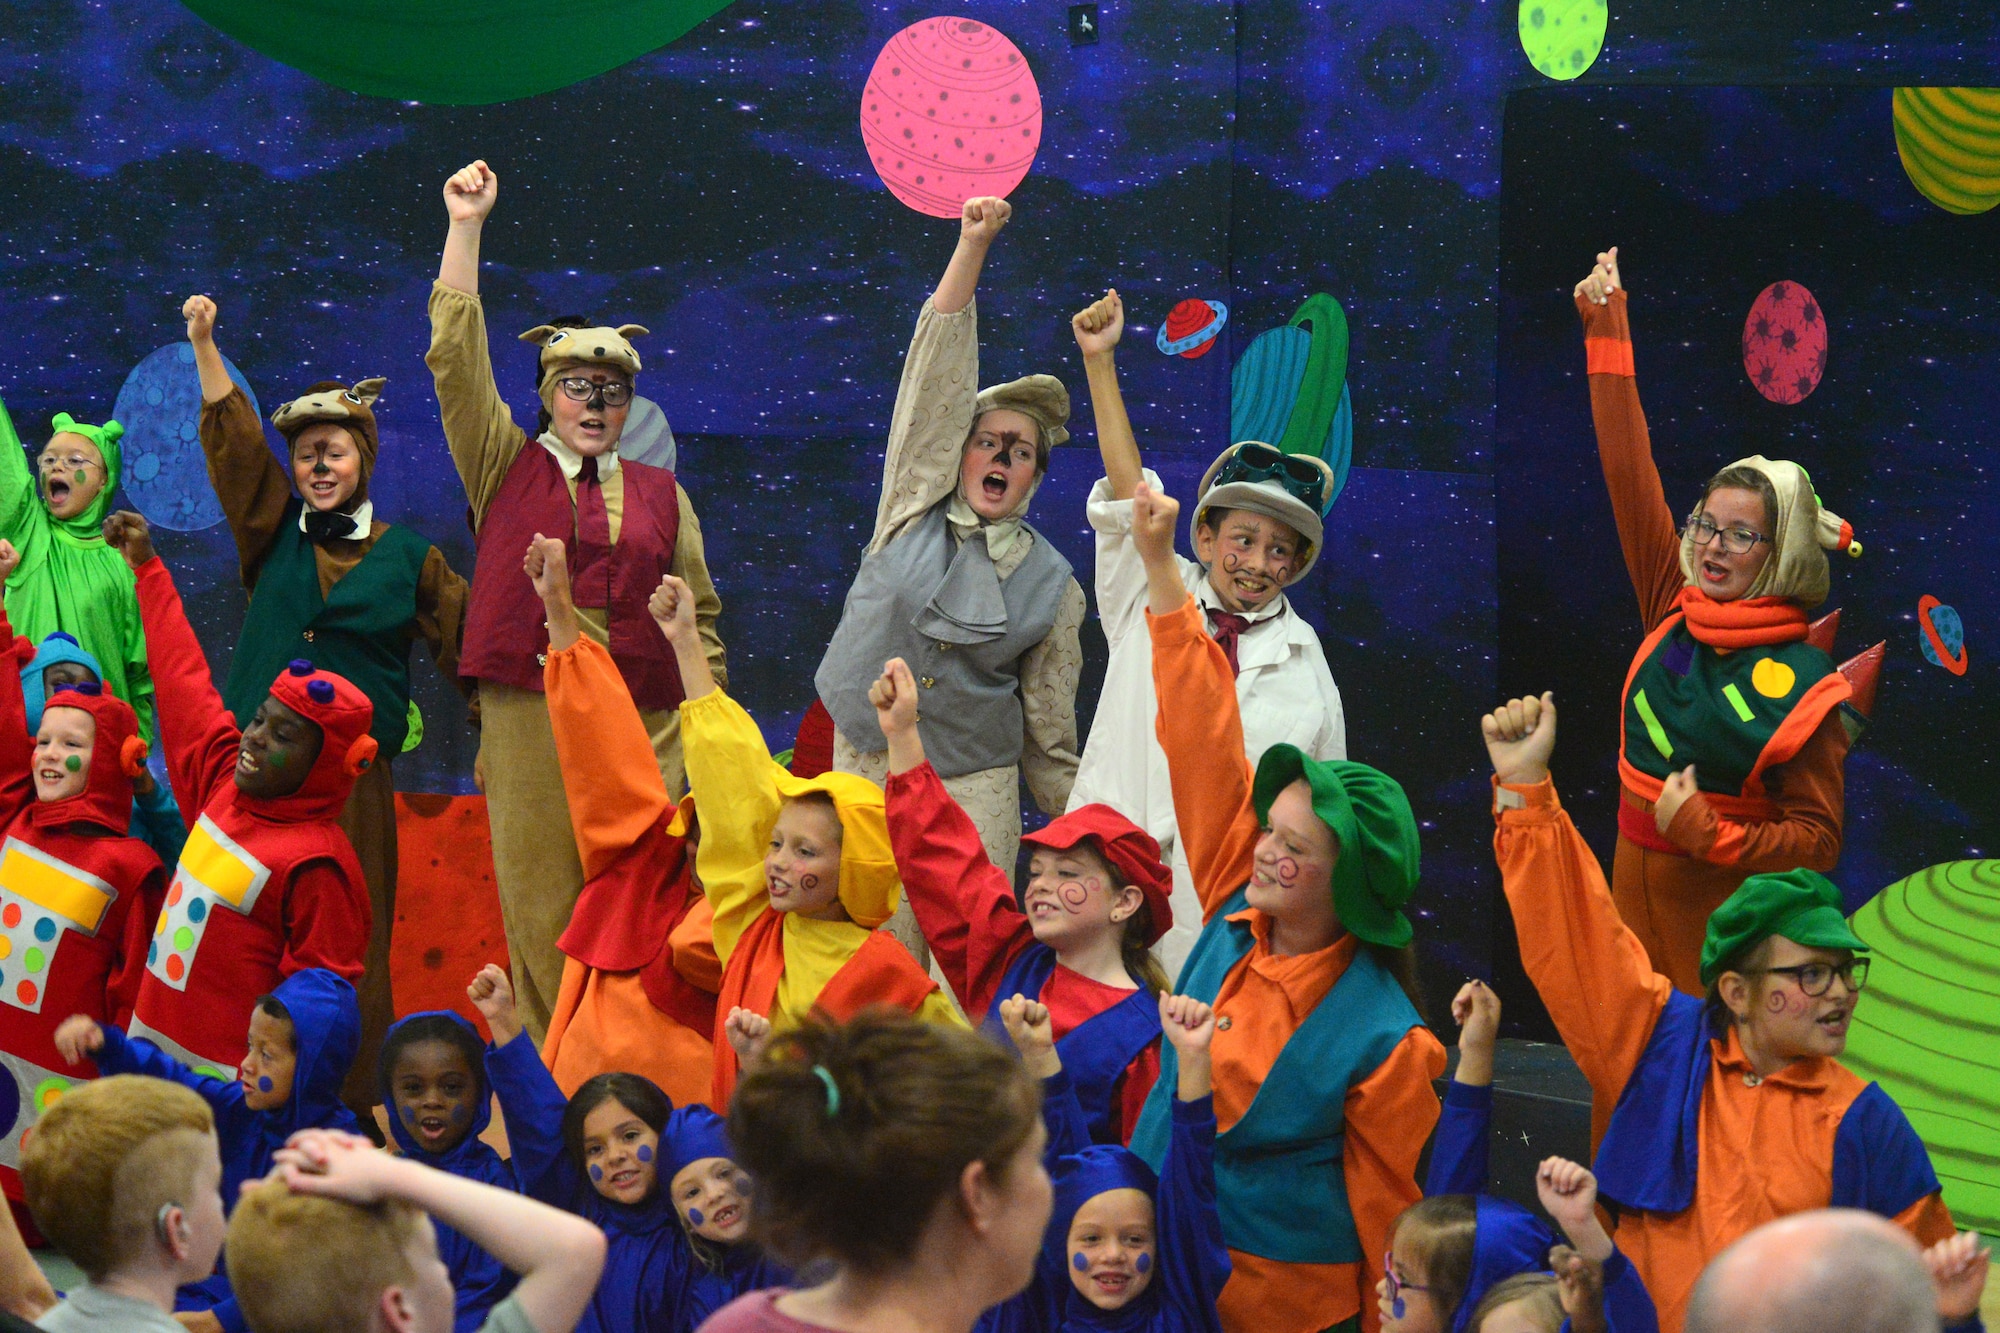 A group of children act out the final scene in Missoula Children’s Theatre’s production of “Gulliver’s Travels” July 20, 2018, at Dover Air Force Base, Del. This scene marked the end of the theatre company’s visit to the base. (U.S. Air Force photo by Airman 1st Class Dedan D. Dials)